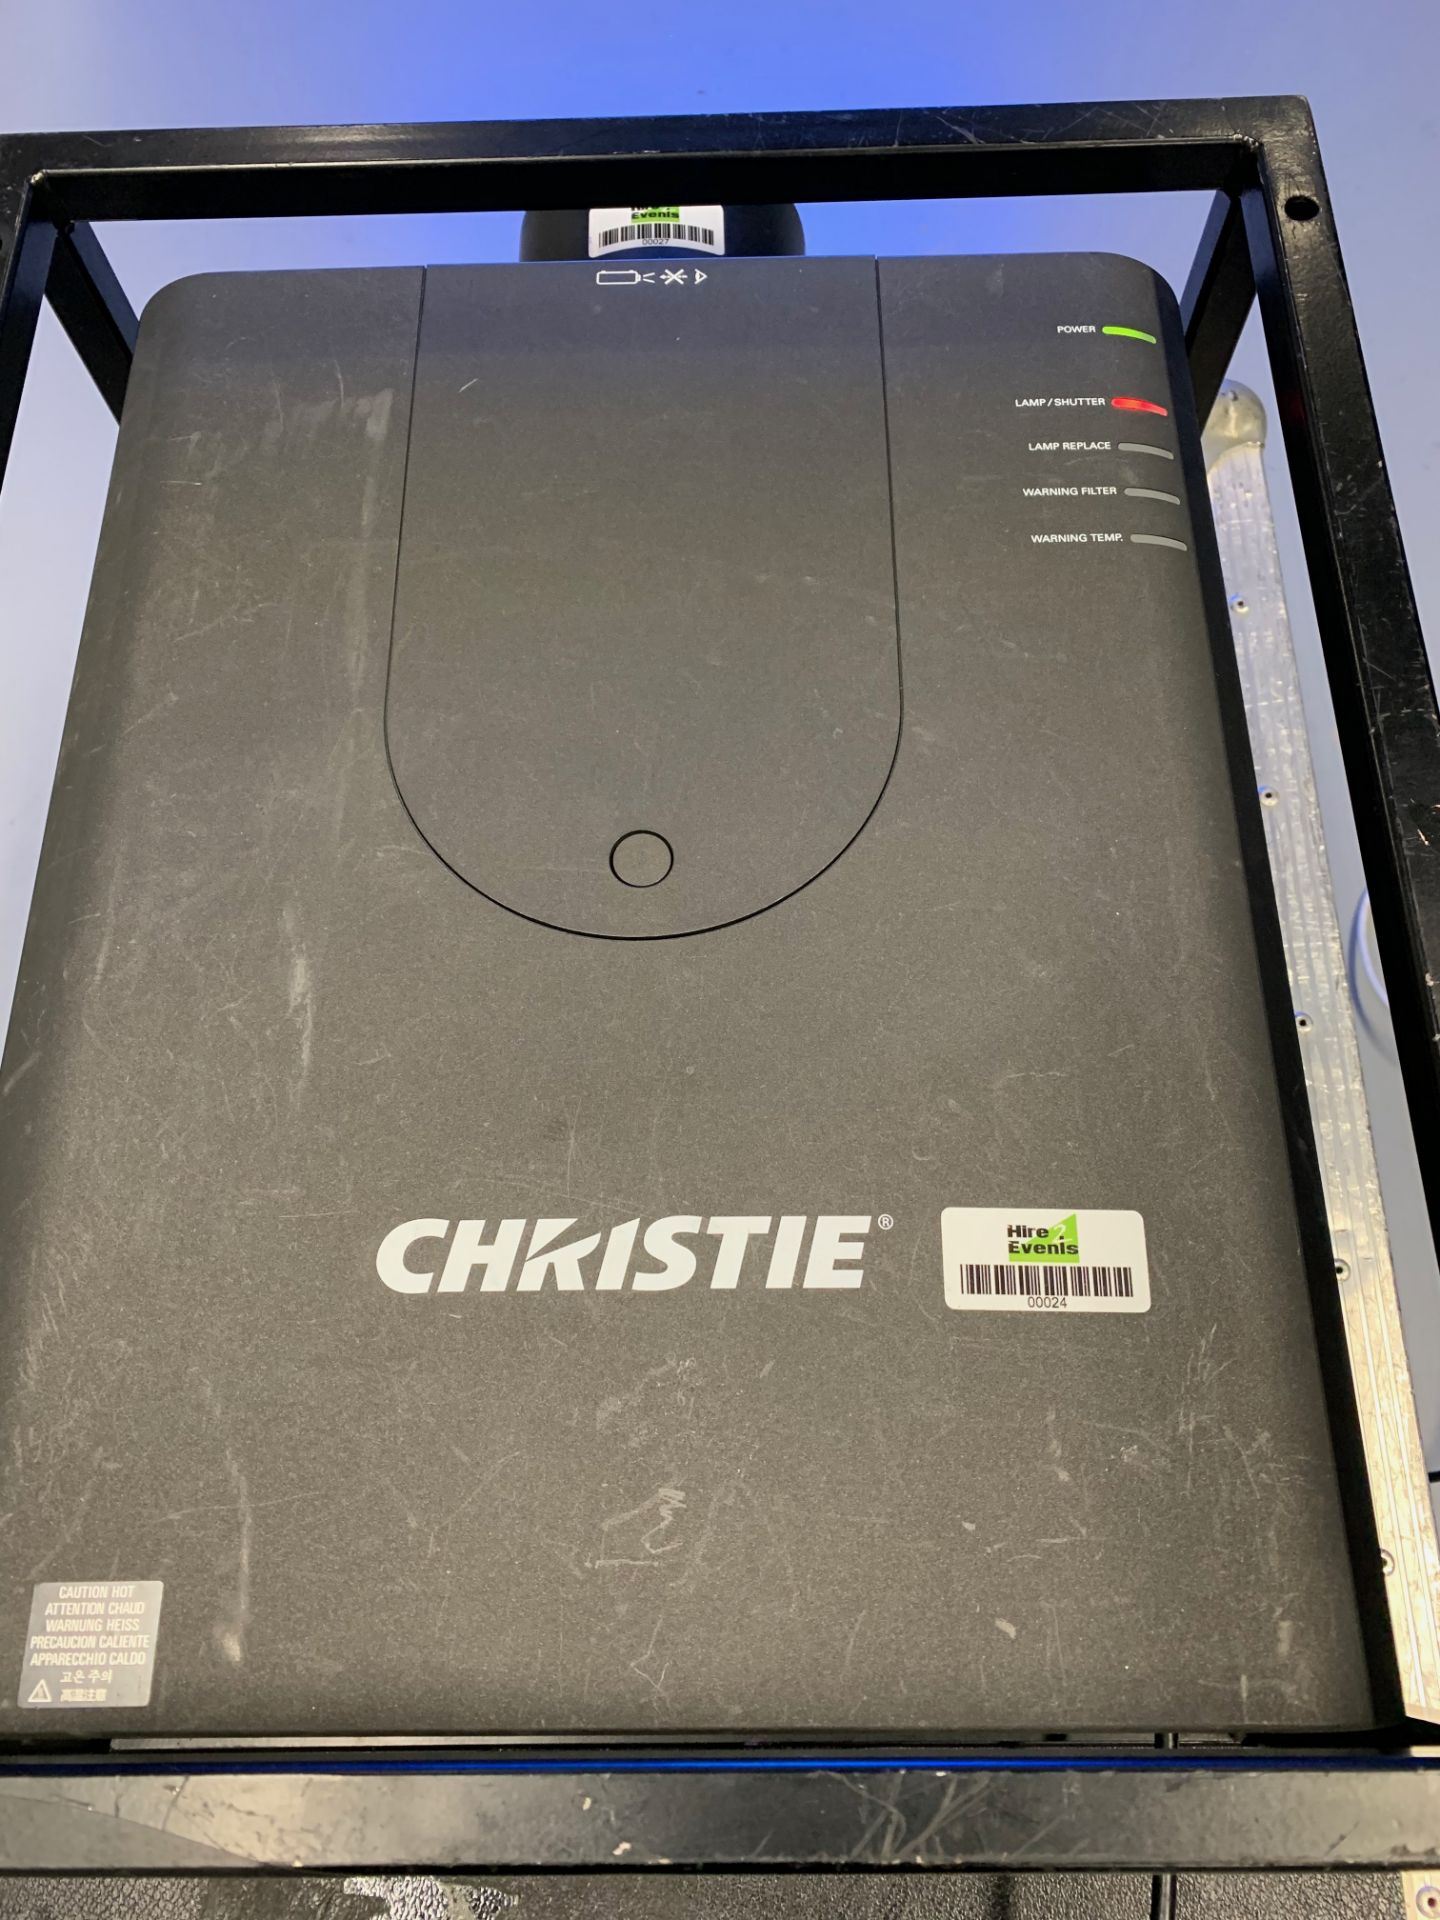 Christie LHD 700 Projector Serial No 34800398 DOM 2012 HDMI Input, DVI Input, VGA Input & Lamp - Image 4 of 9